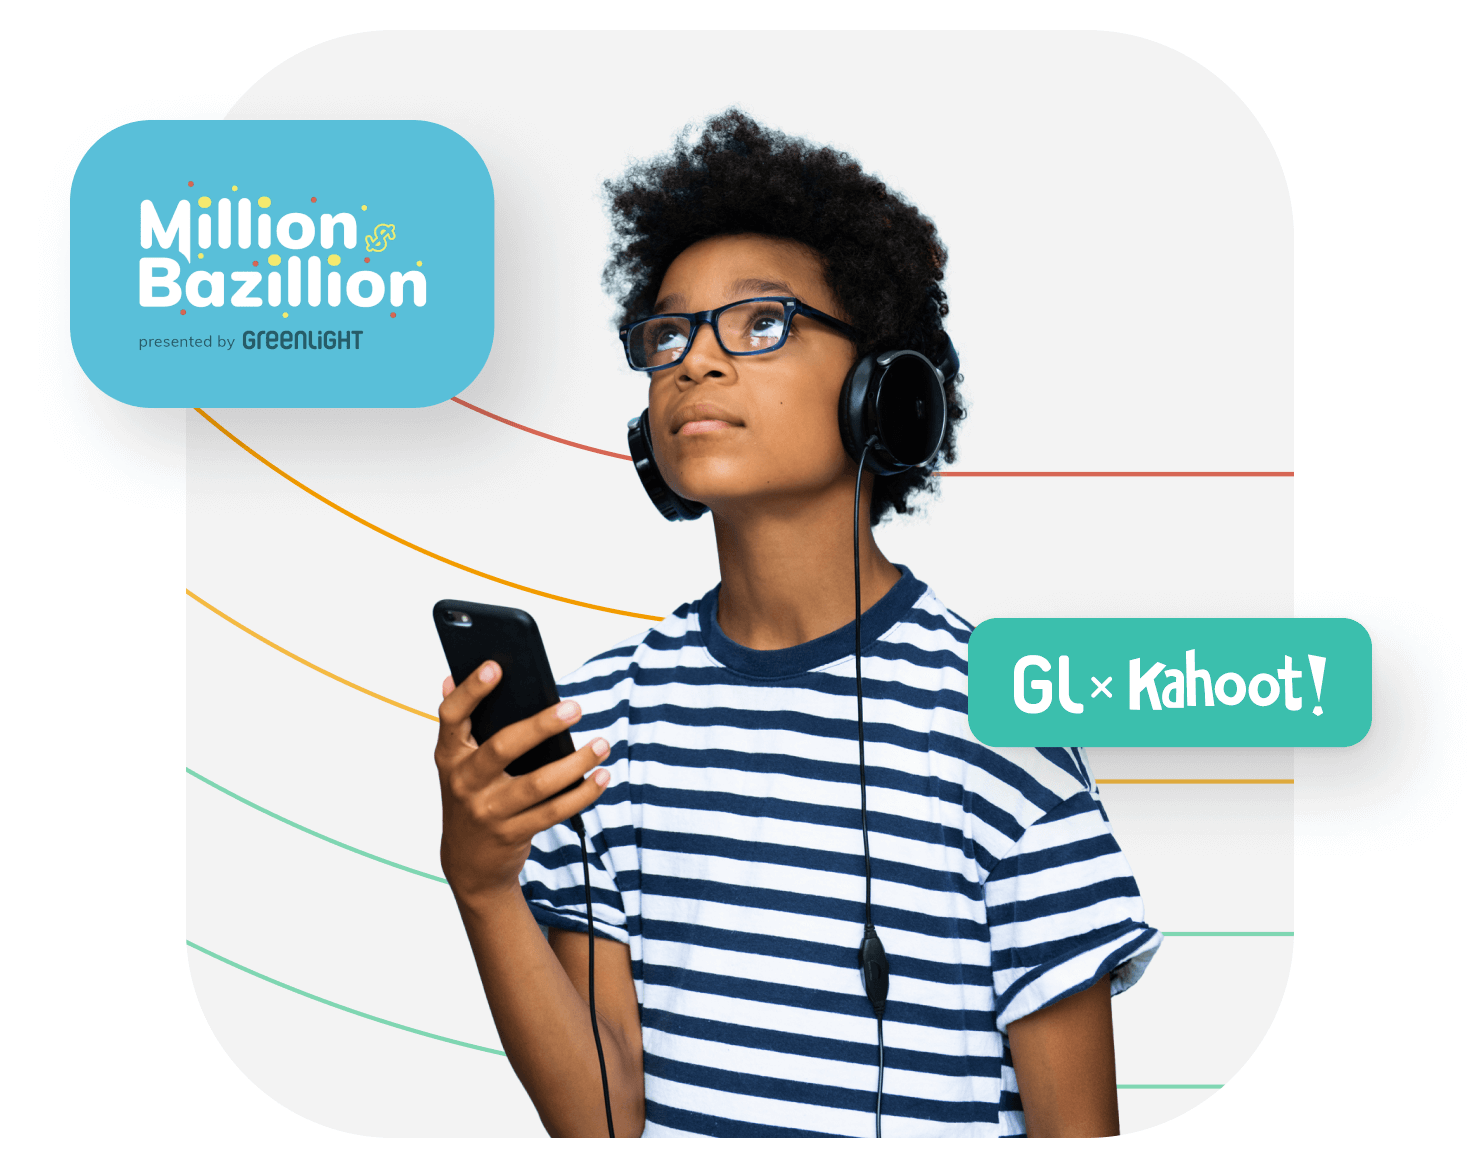 young boy with headphones on learning from Million Bazillion and Kahoot
